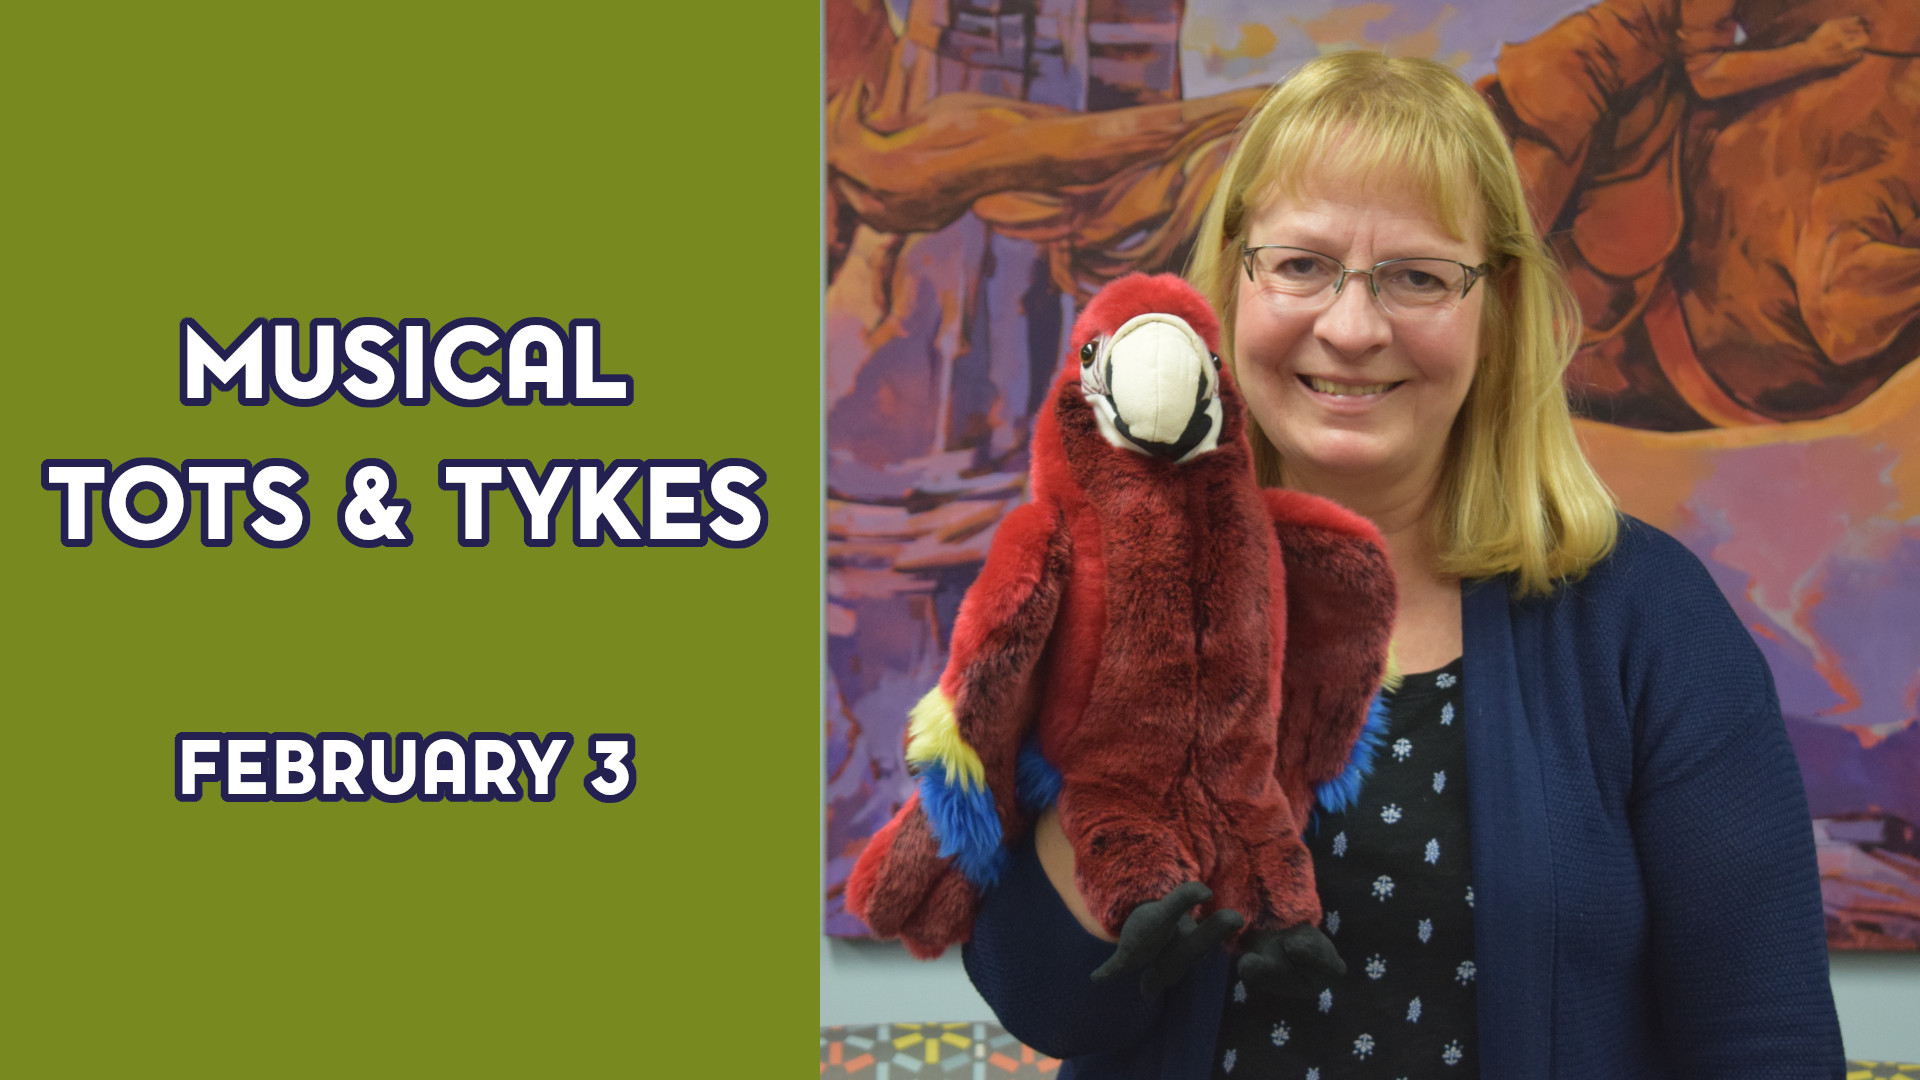 A woman holds a parrot puppet next to the text "Musical Tots & Tykes February 3"